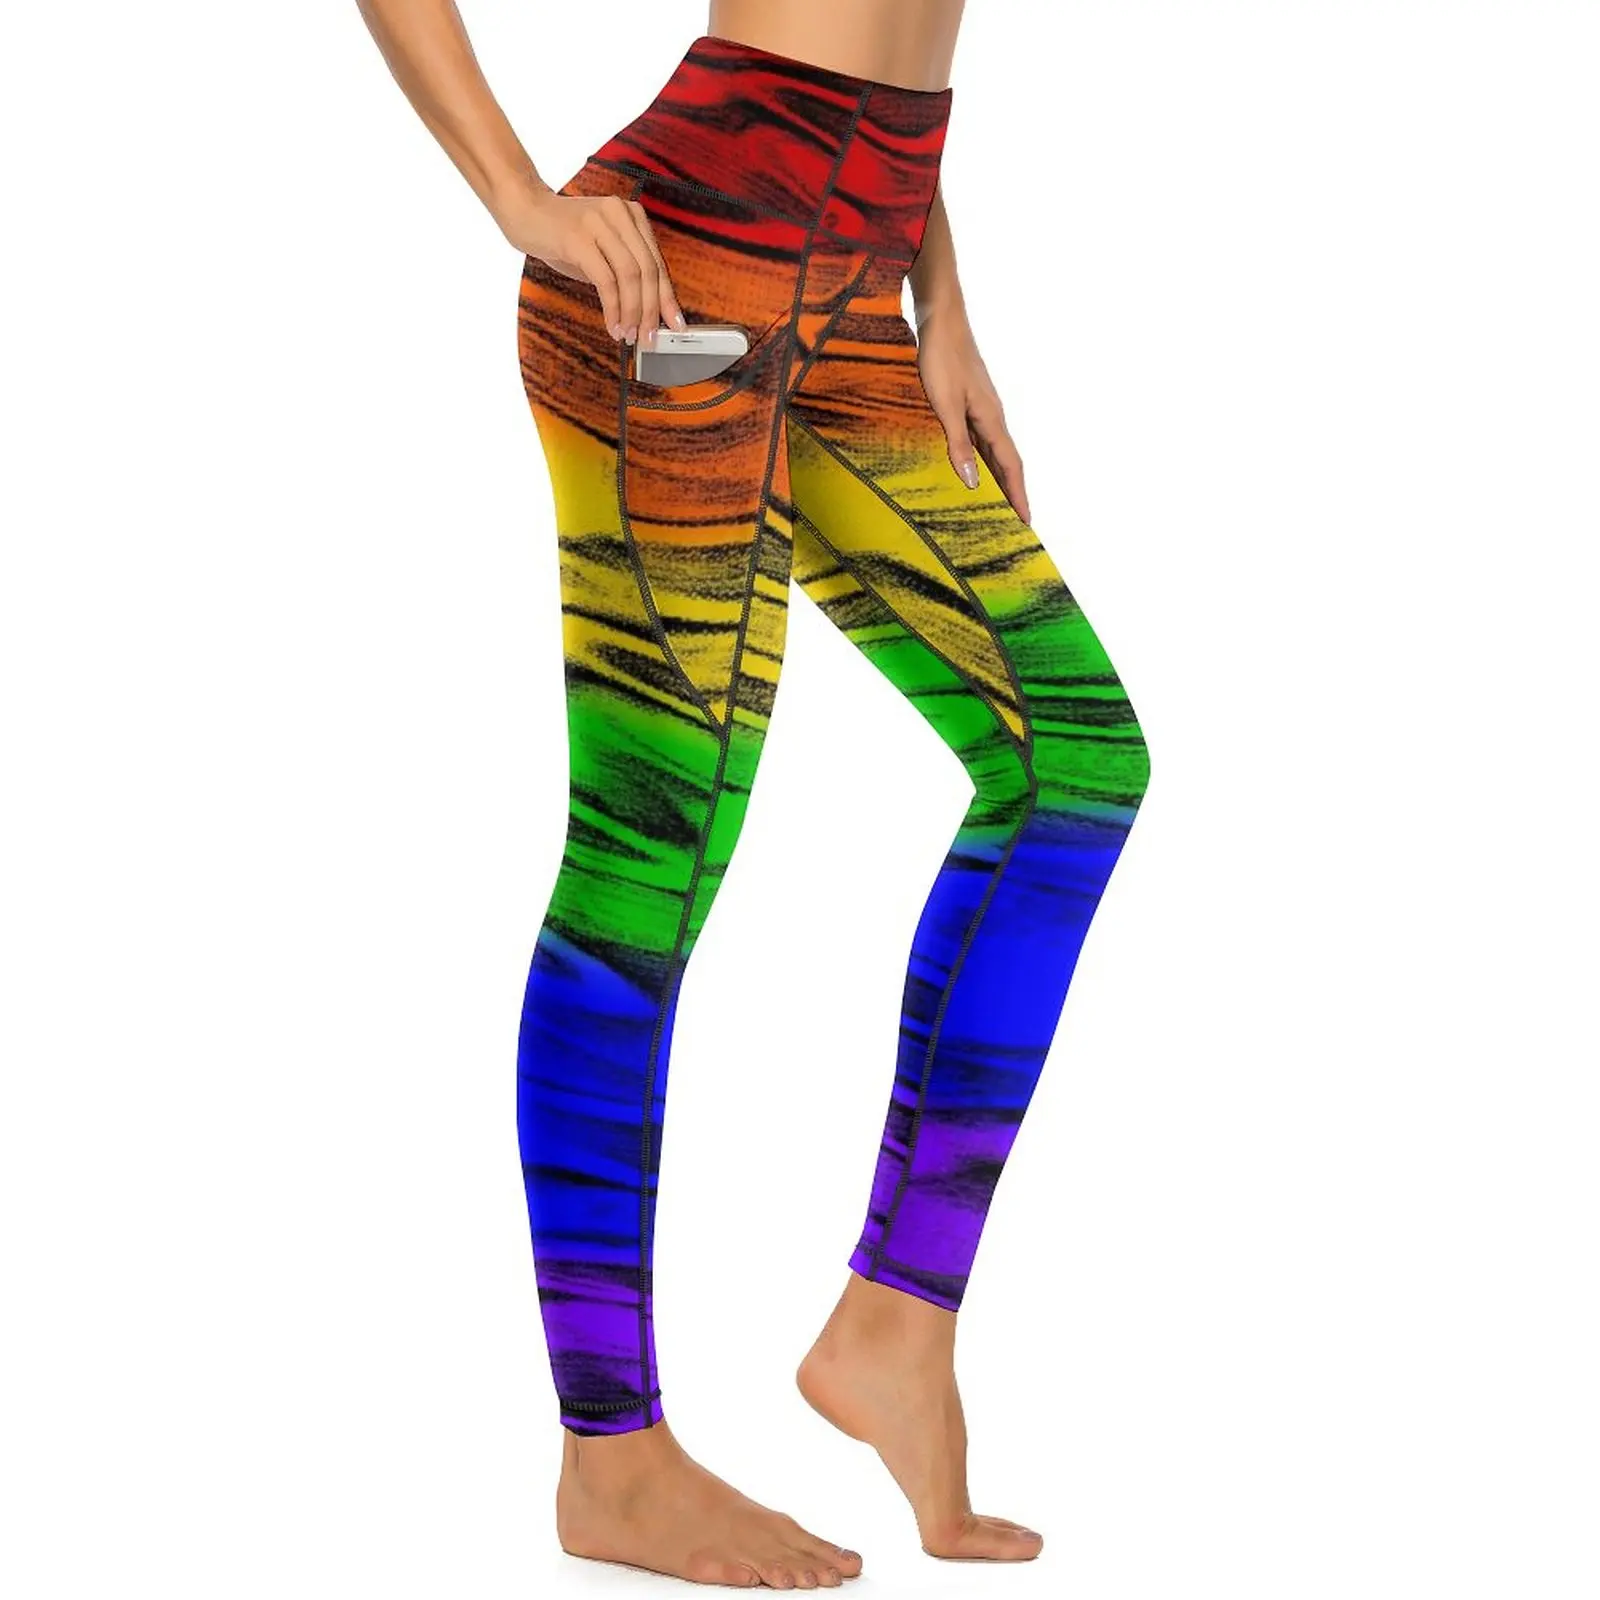 

Rainbow Abstract Leggings Sexy Colorful Marble High Waist Yoga Pants Vintage Stretchy Leggins Women Design Fitness Sports Tights